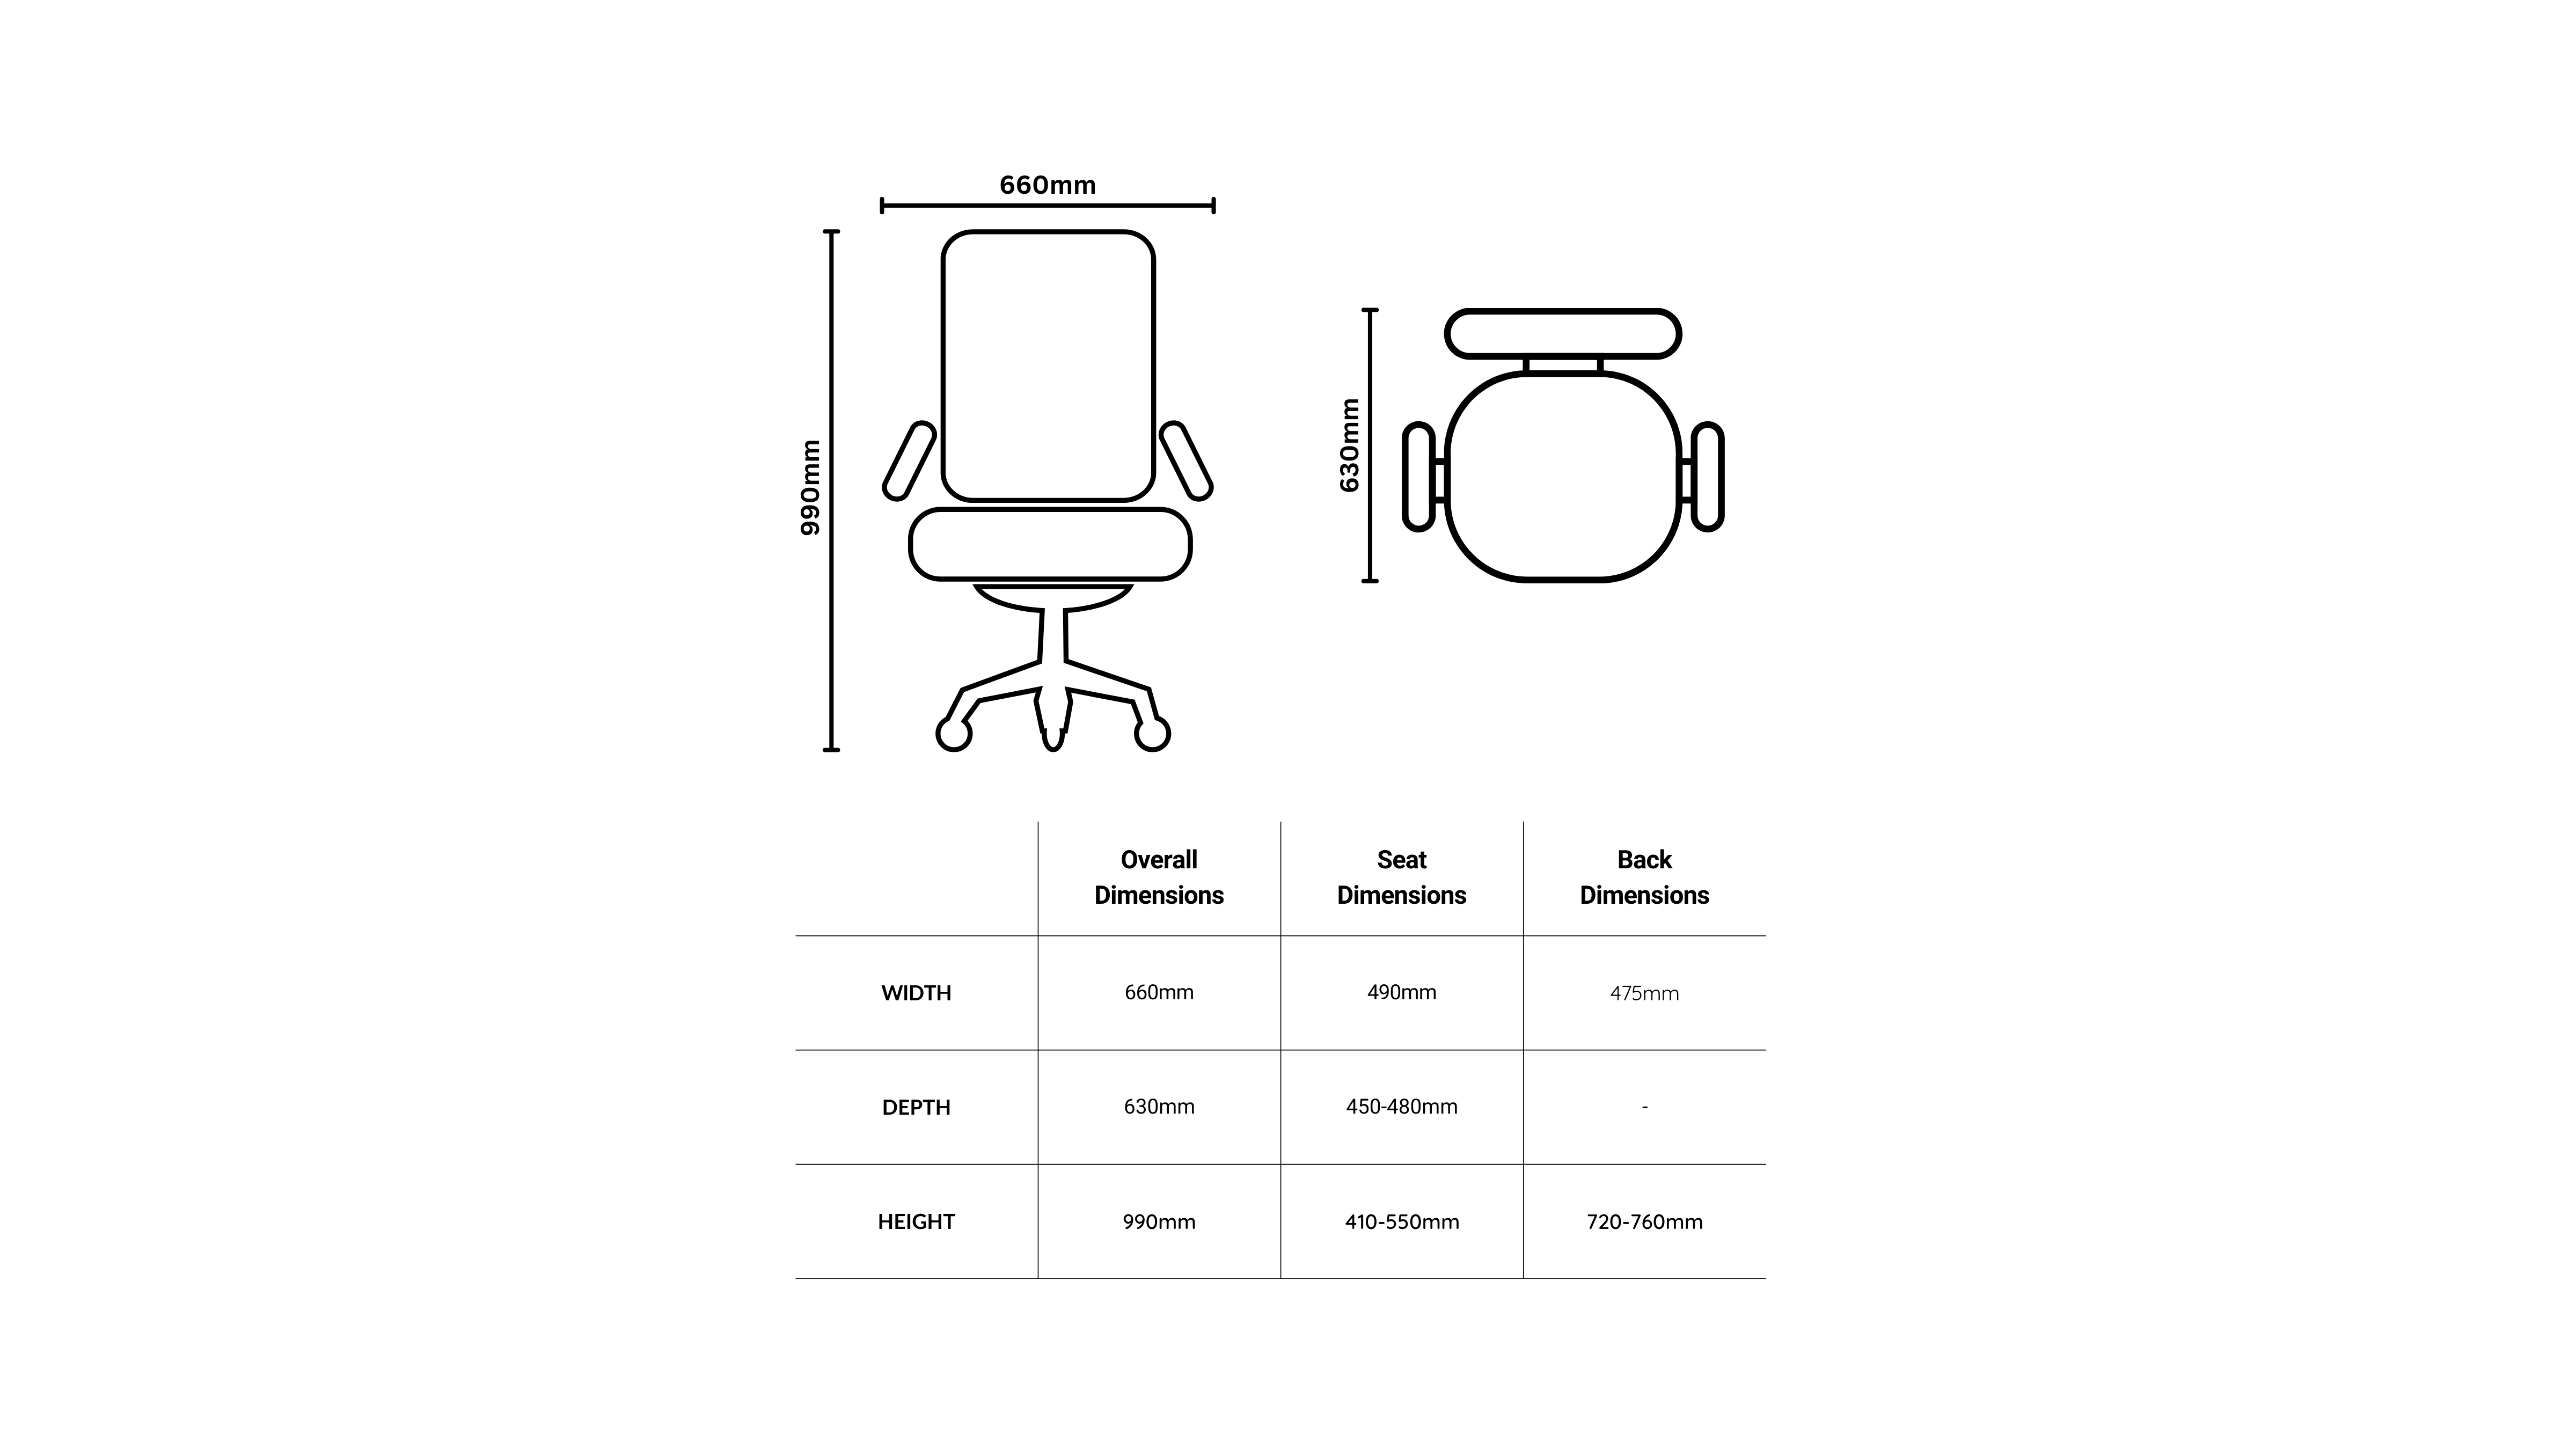 Illustration with dimensions for Moray office chair. The overall dimensions are 660mm in width, 630mm in depth, and 990mm in height. The seat dimensions are 490mm in width with an adjustable depth ranging from 450mm to 480mm. The back dimensions are provided as 475mm in width and an adjustable height from 720mm to 760mm. 